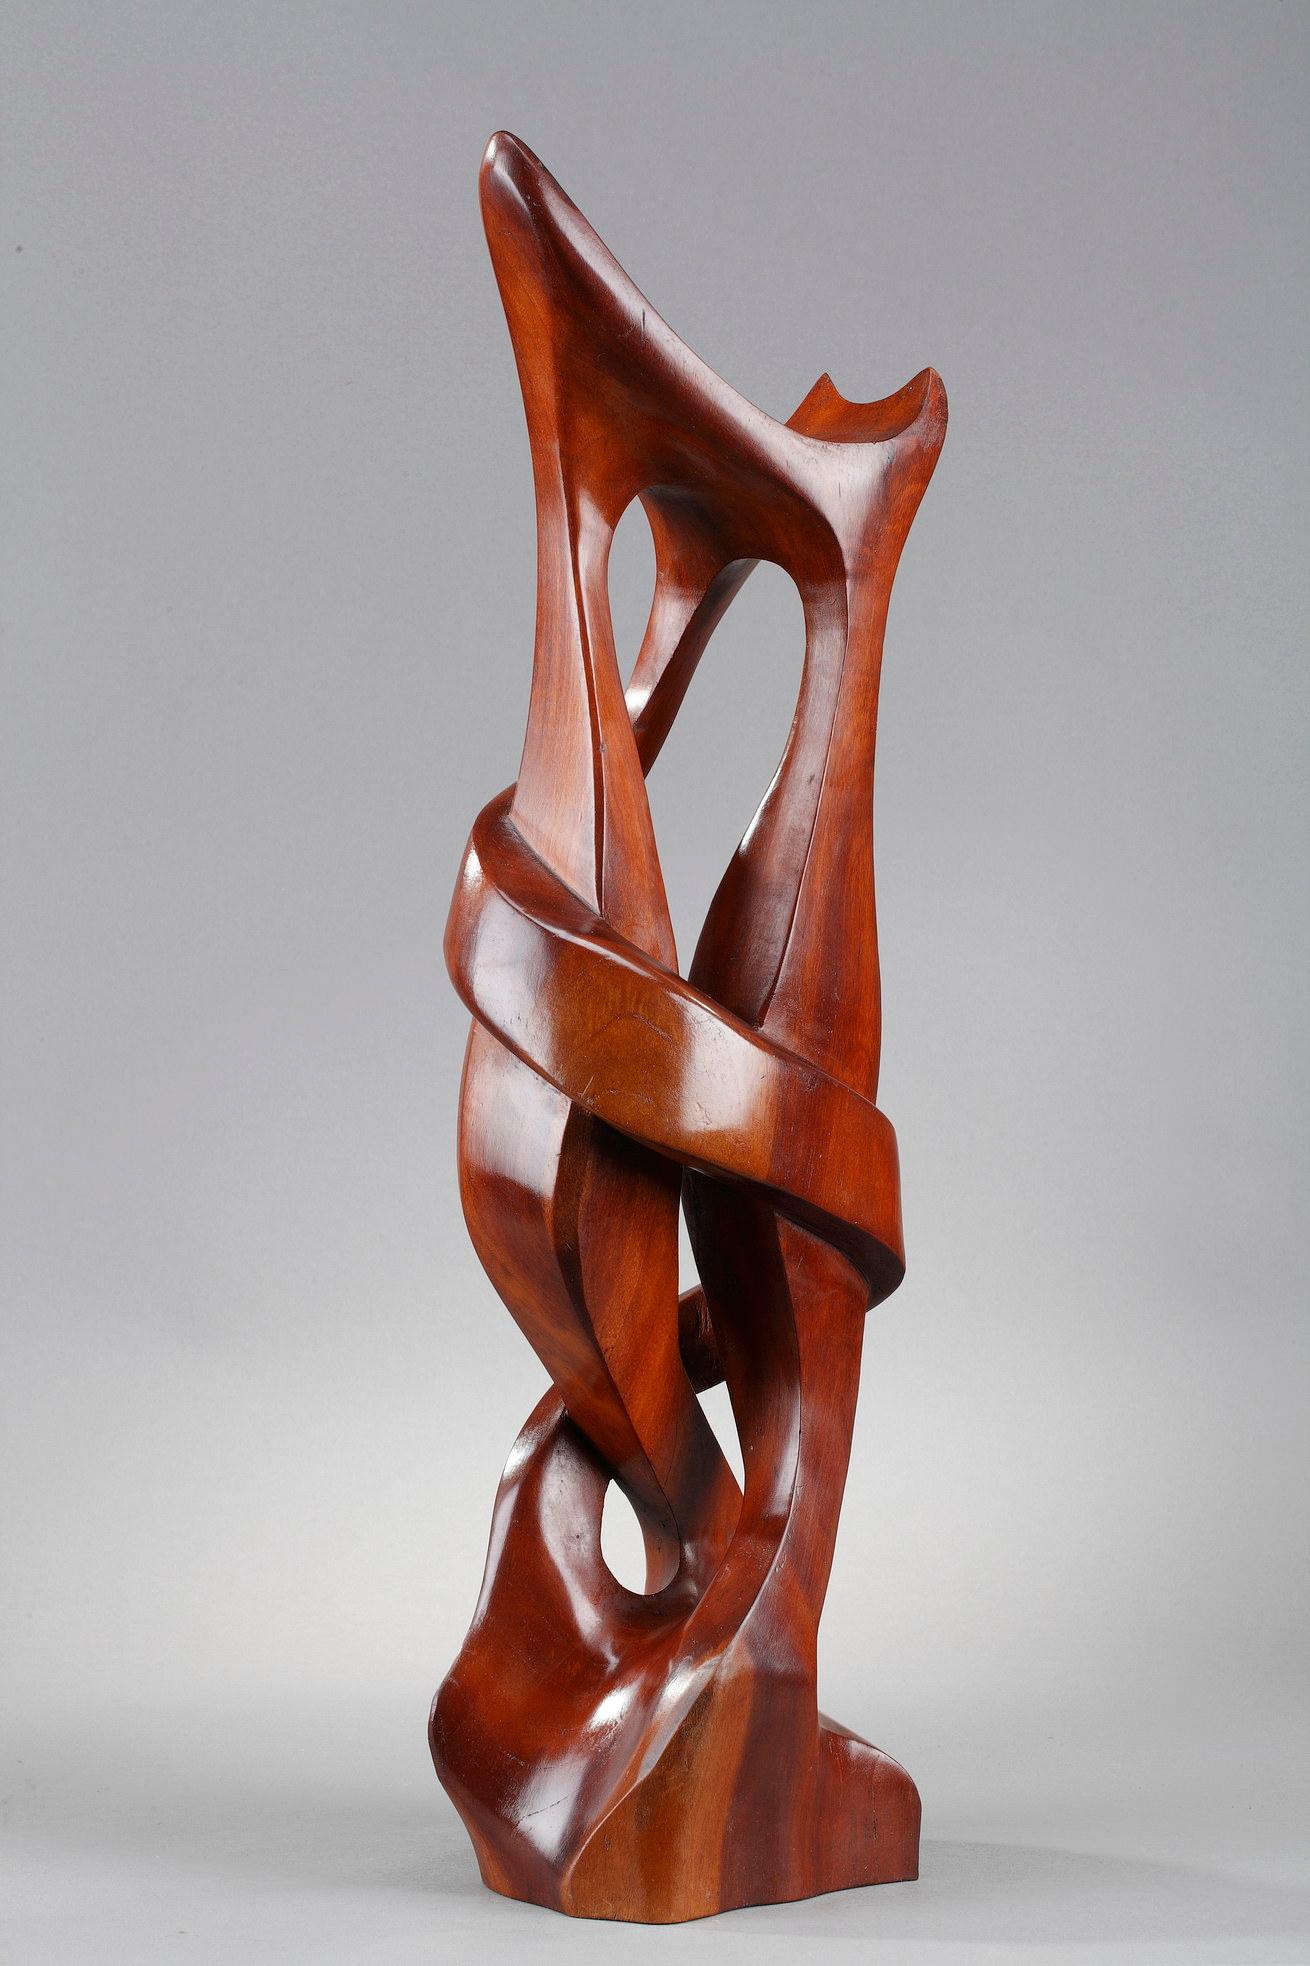 Monoxyle sculpture in exotic wood titled 